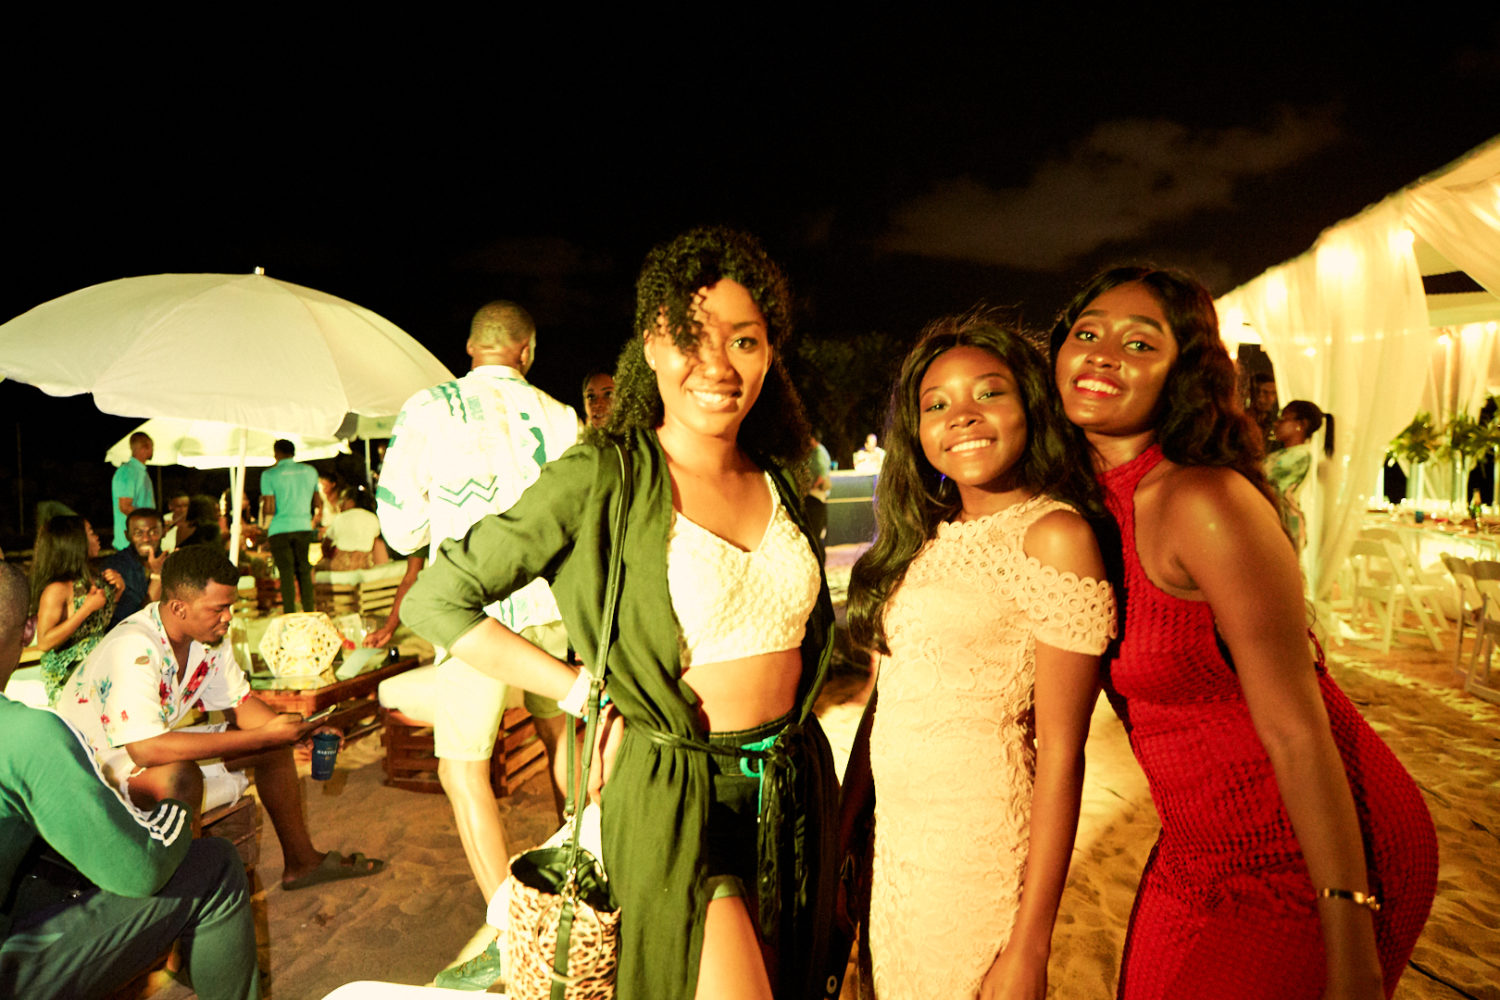 Inside the SCHICK Magazine & Beach Is Better Pre Fashion Week Party